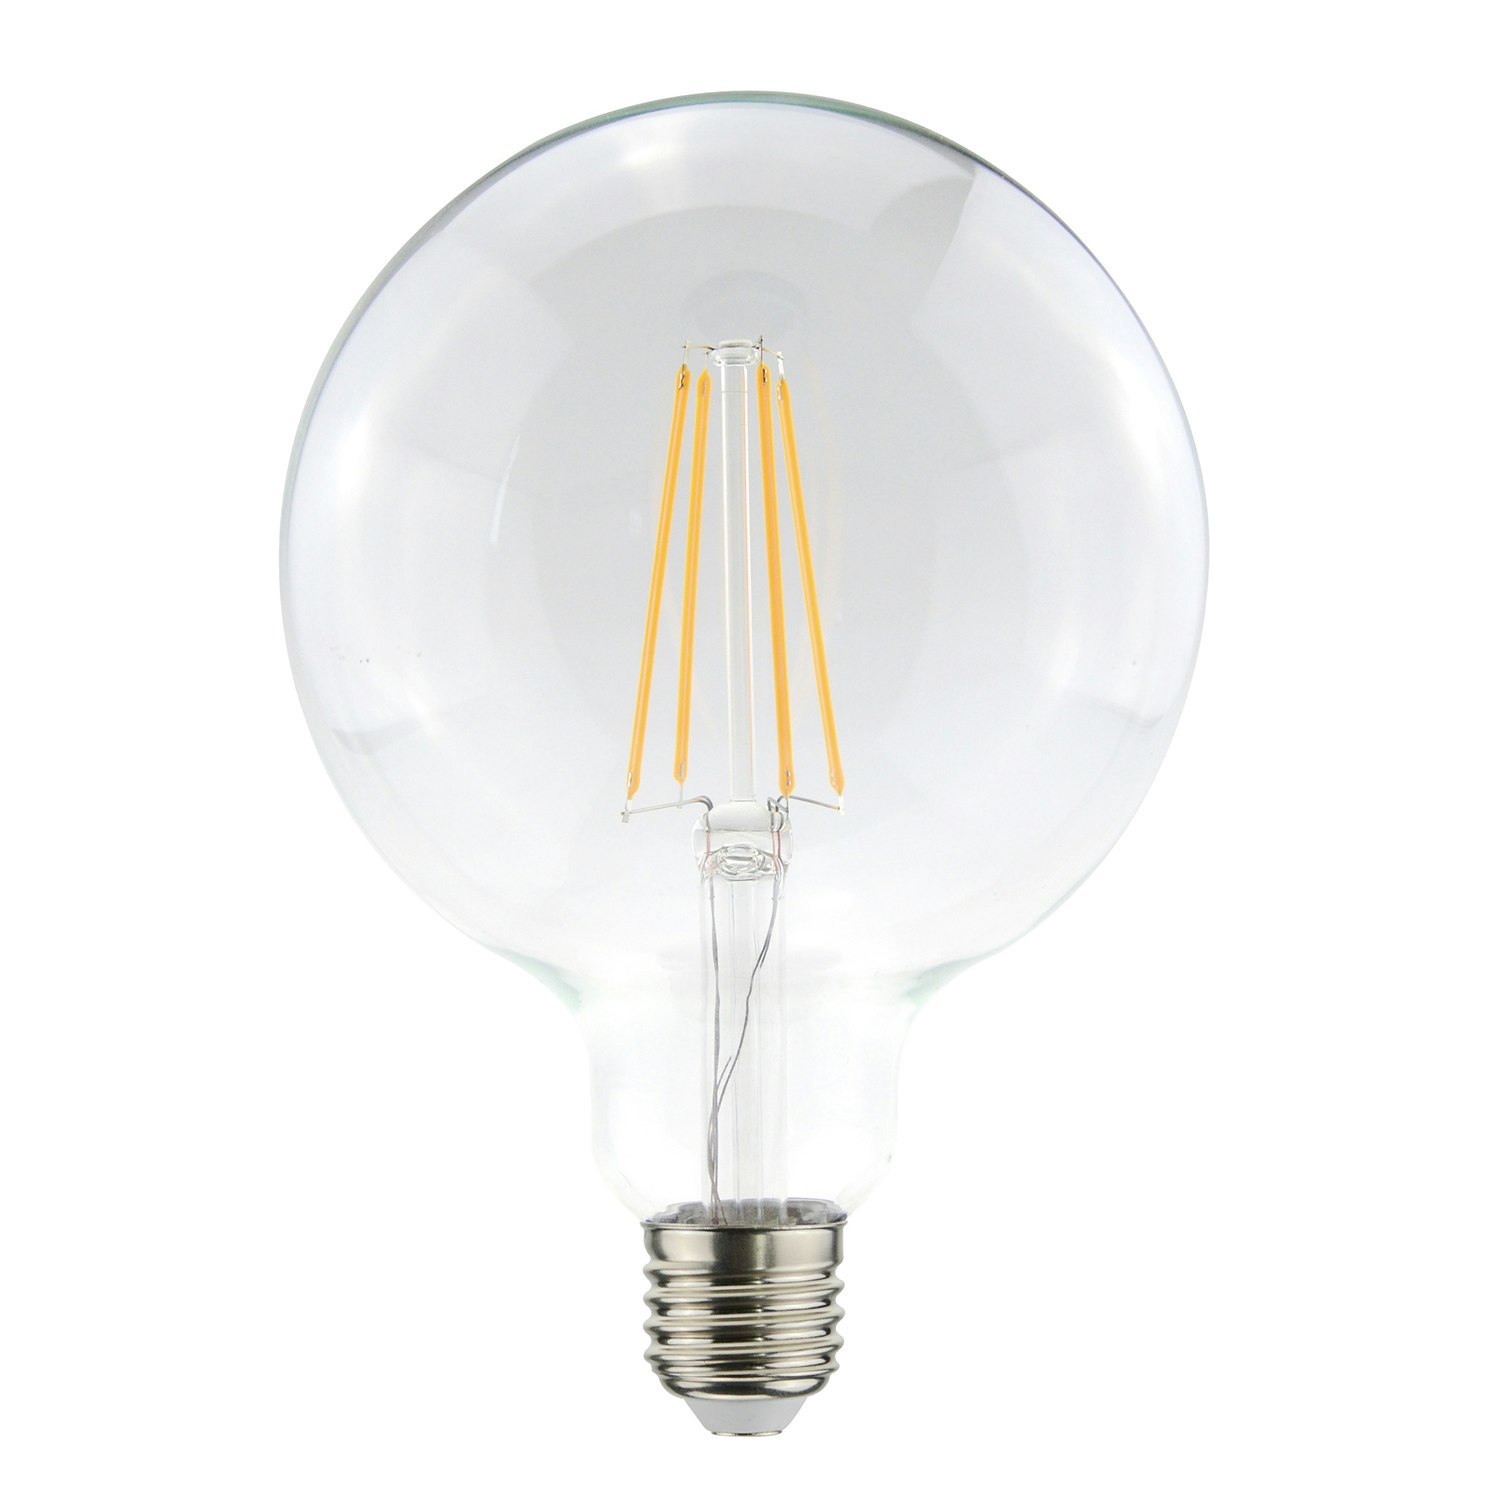 plus personificering Demon Play LED Decor Filament Globe 95mm 2200K 3,5W E27 300lm Dimmable Clear - Airam @  RoyalDesign